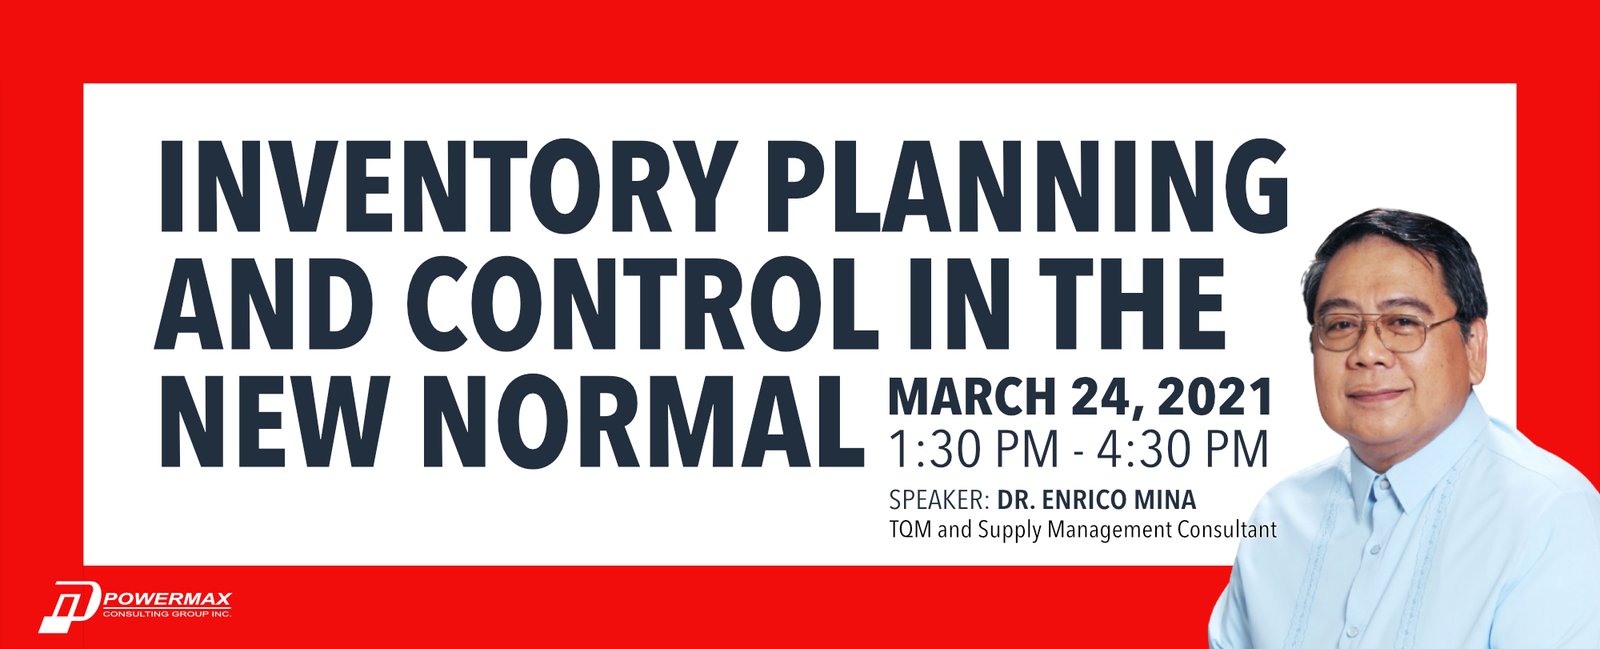 Dr. Enrico Mina | Inventory Planning and Control in the New Normal